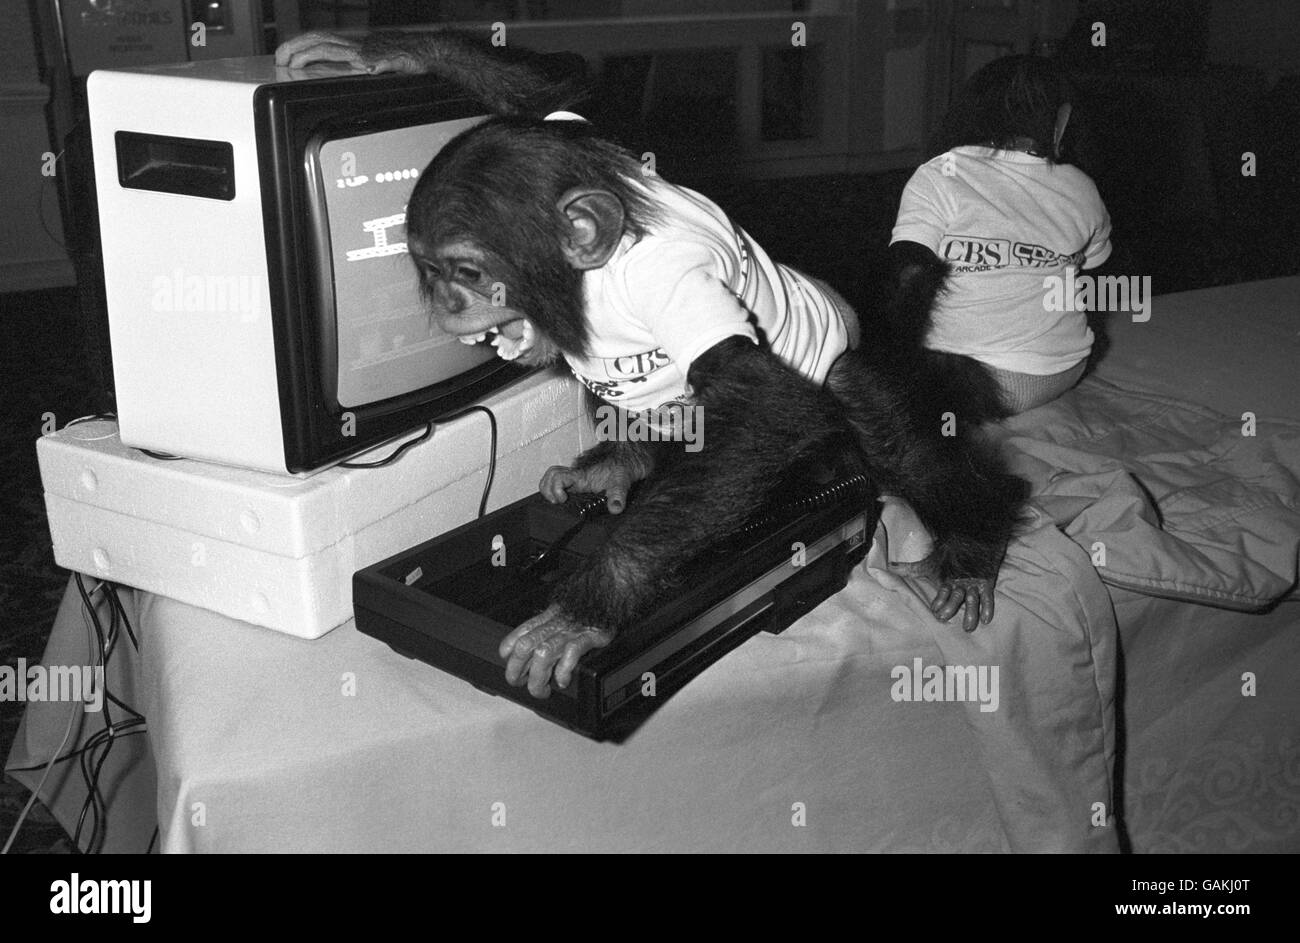 Chimpanzee William of Twycross Zoo, Leicester helps to launch CBS Electronics new generation of TV games, at a London hotel. Stock Photo